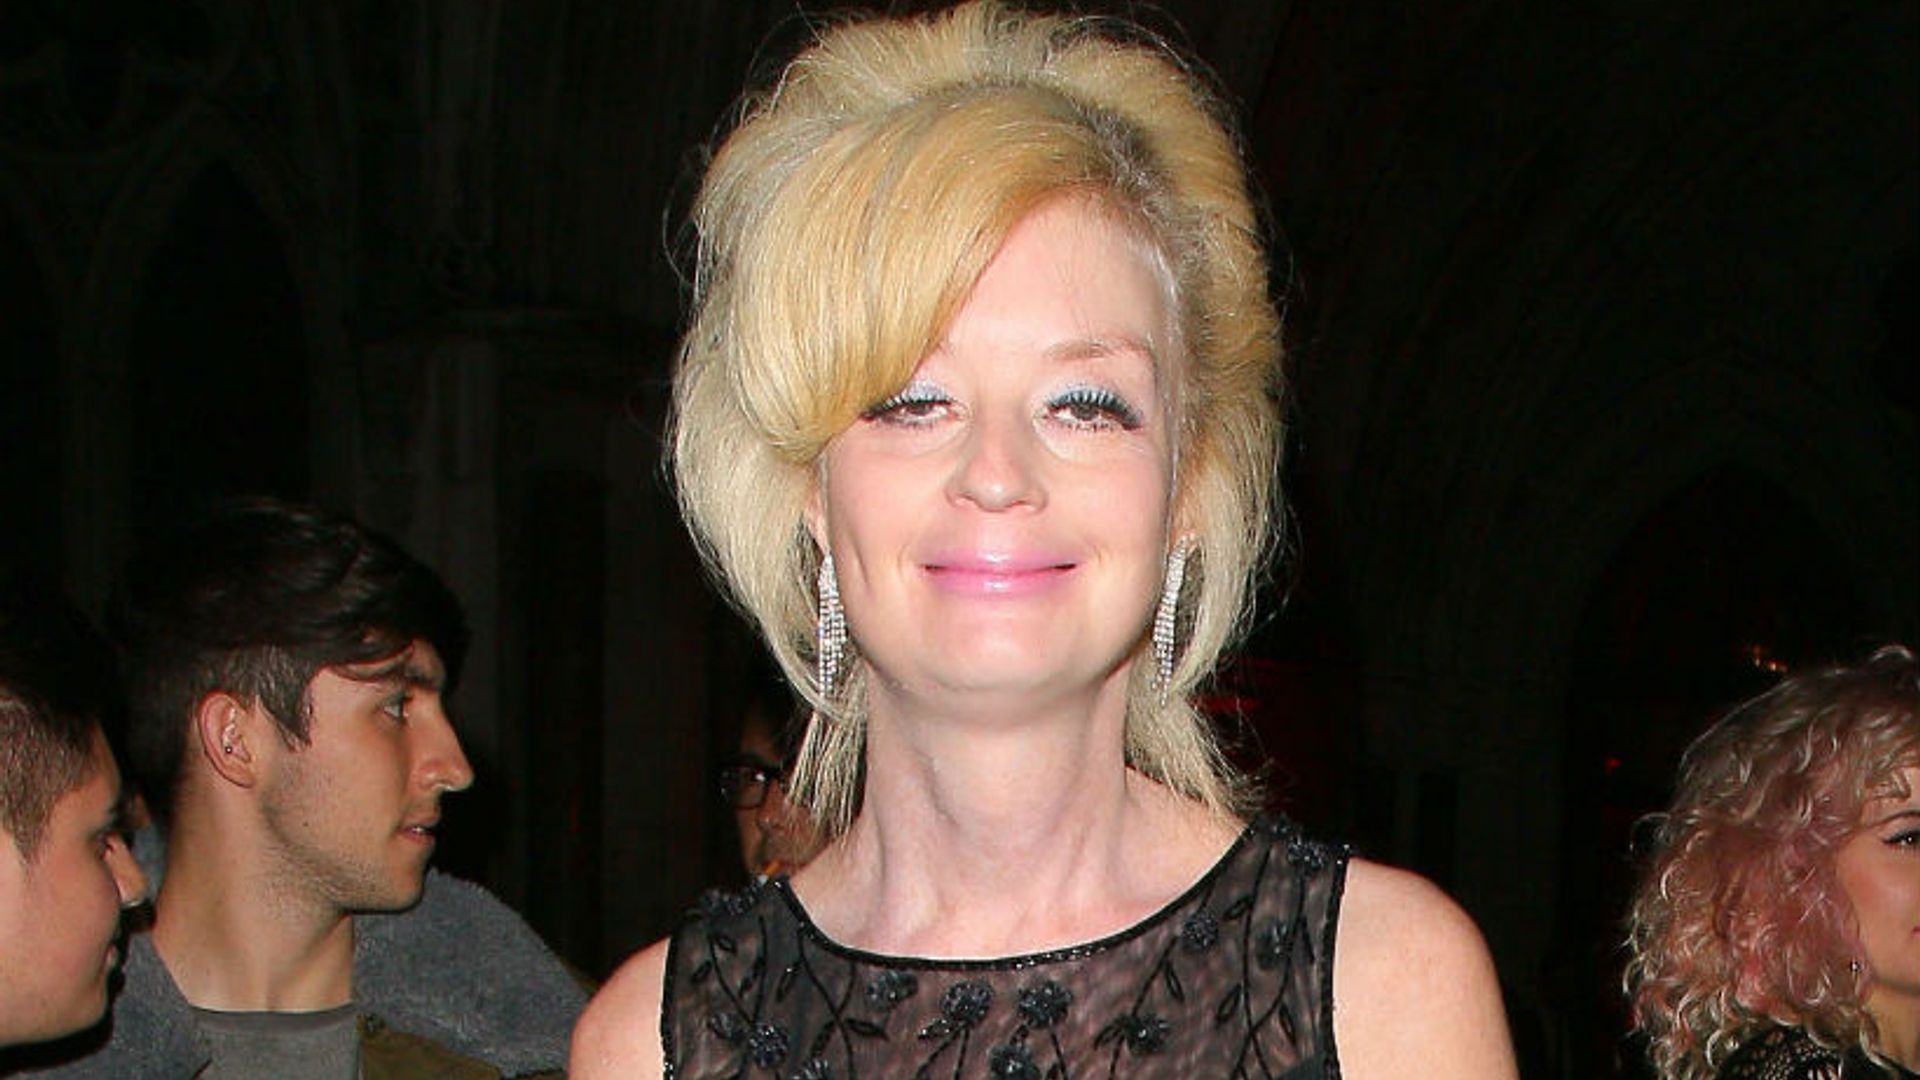 Twitter left stunned after Lauren Harries makes unrecognisible comeback with new toyboy boyfriend